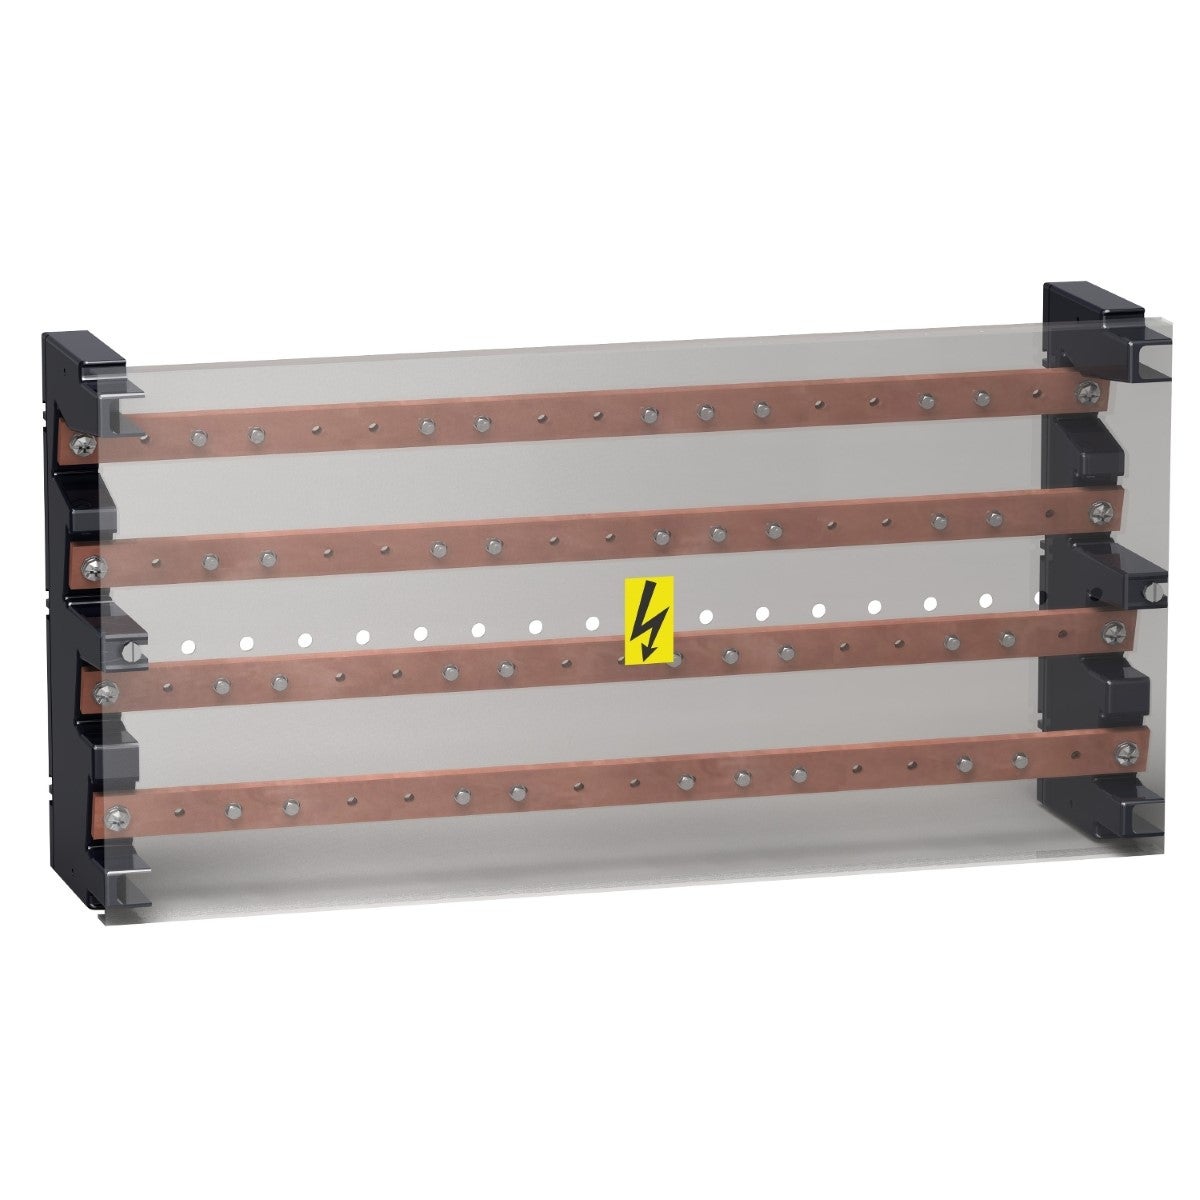 Multi-stage distribution block, LINERGY BS, 4P Multistage Busbar 400A 52holes